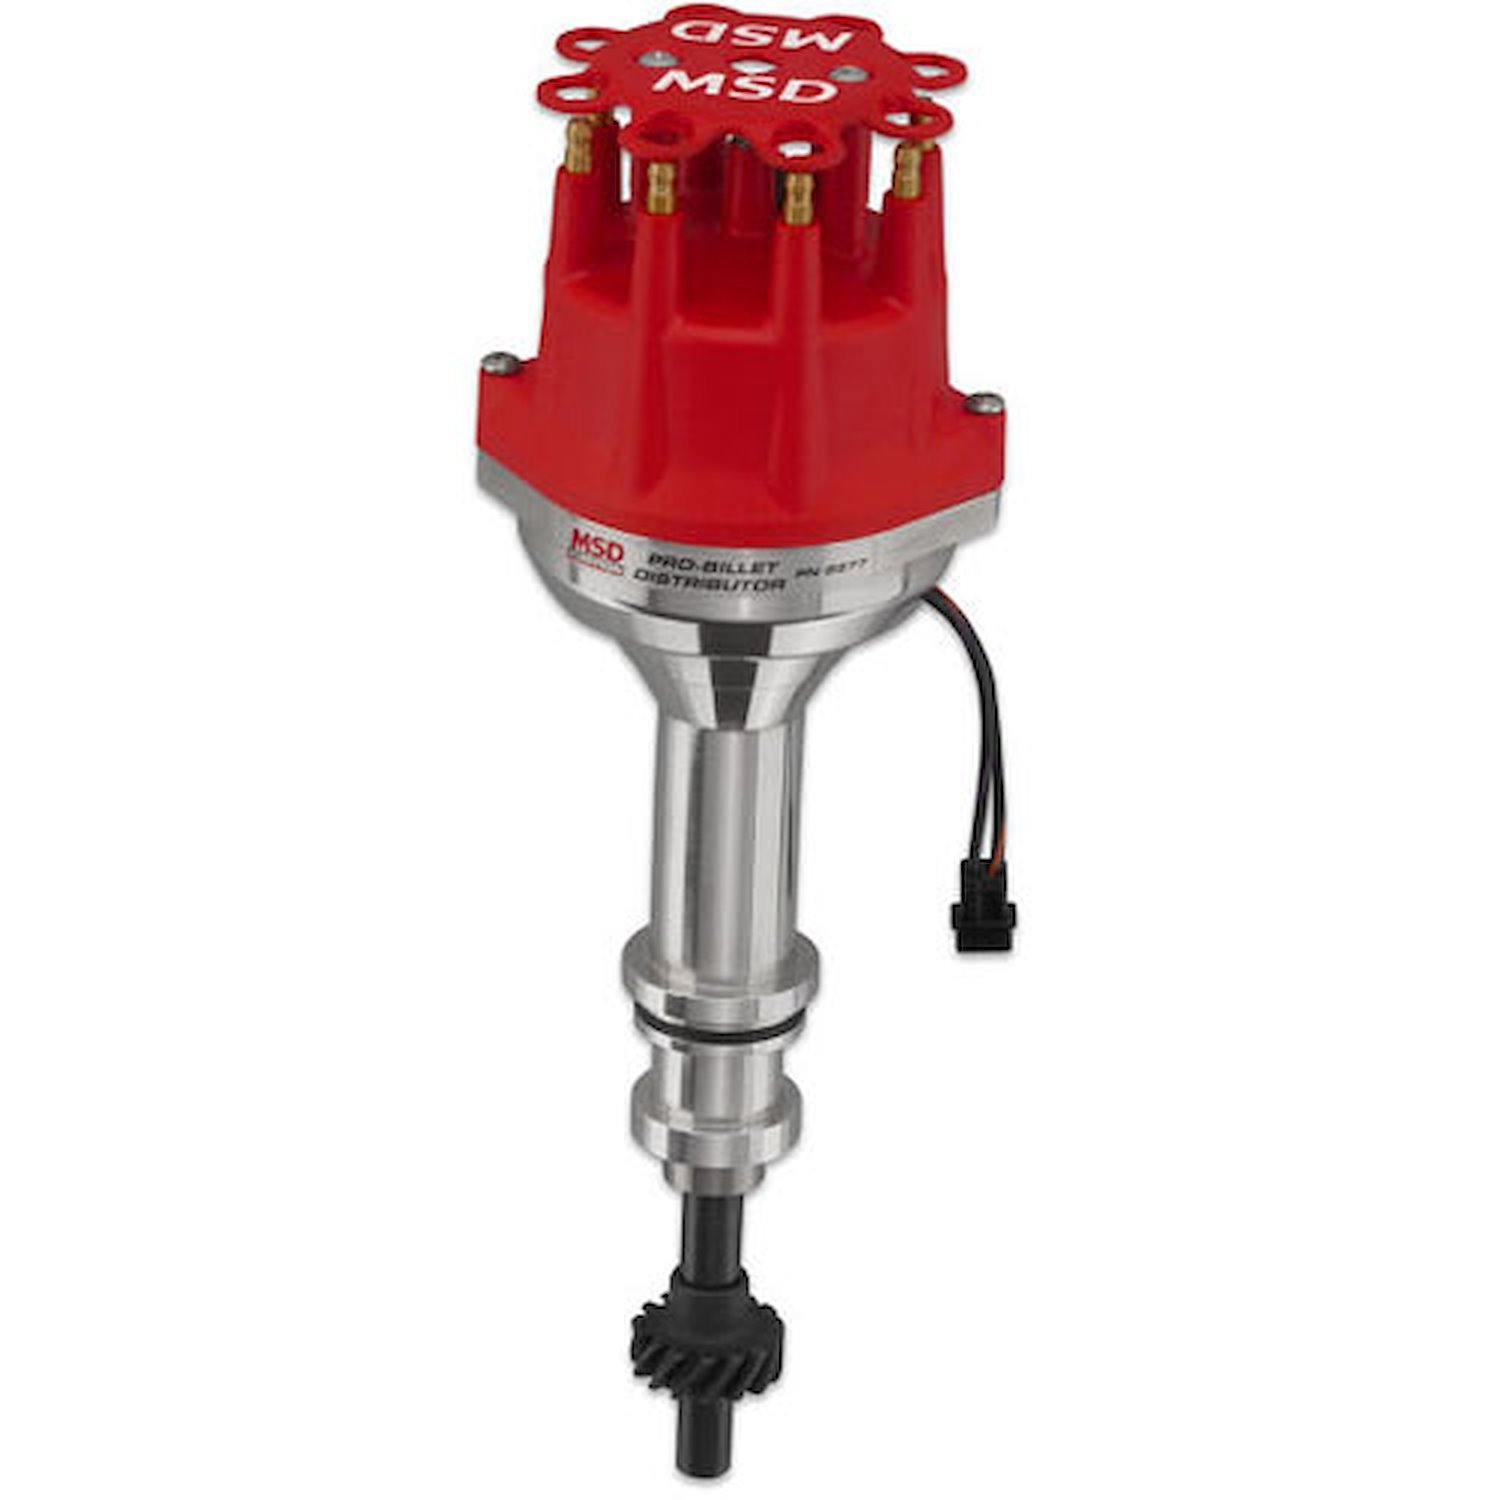 Pro-Billet Small Cap Distributor Ford 351C-460 Red